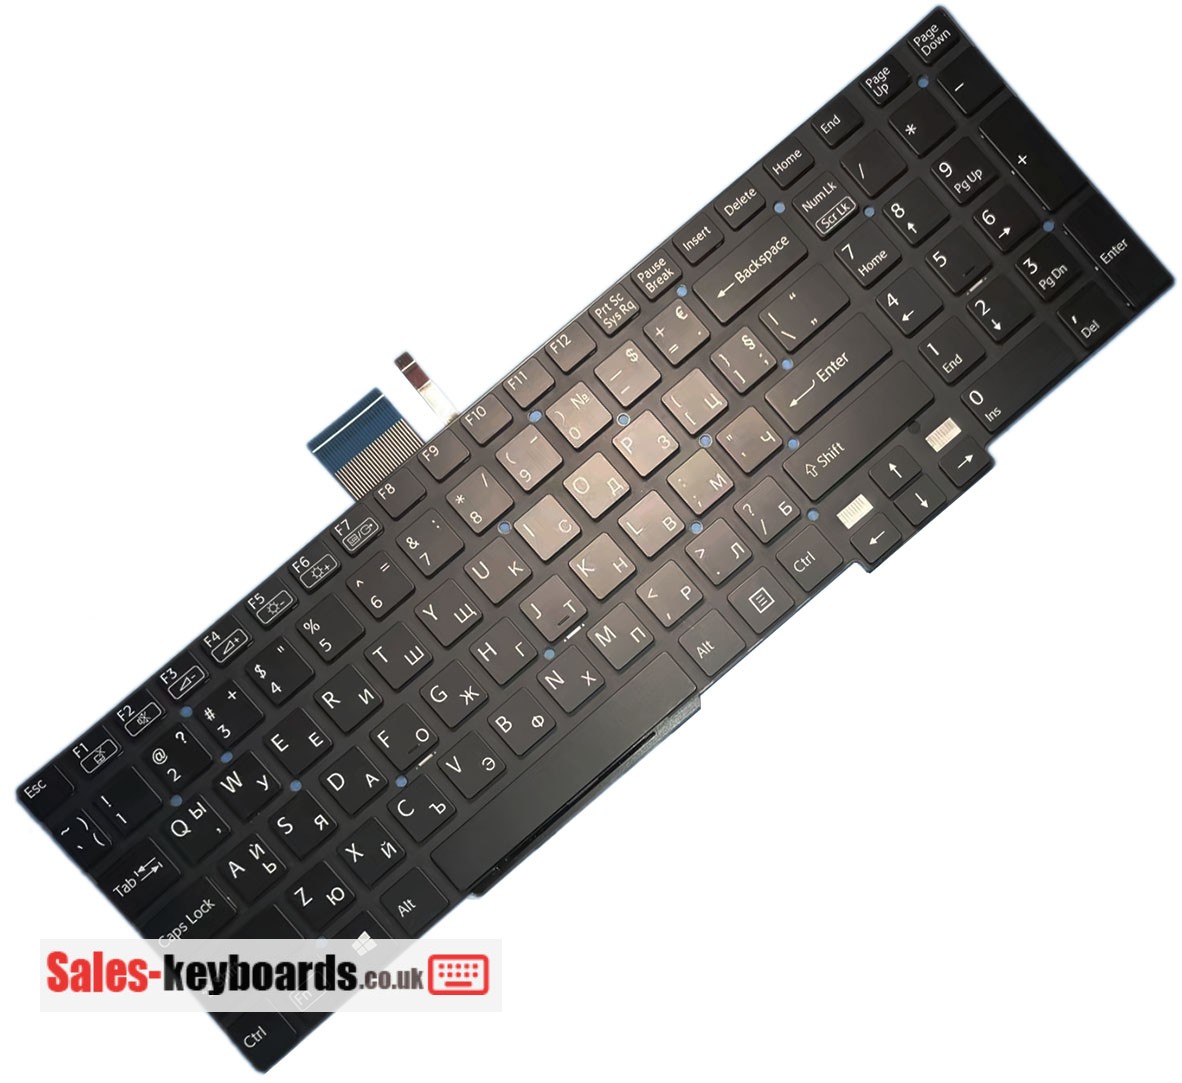 Sony VAIO SVT151190X Keyboard replacement